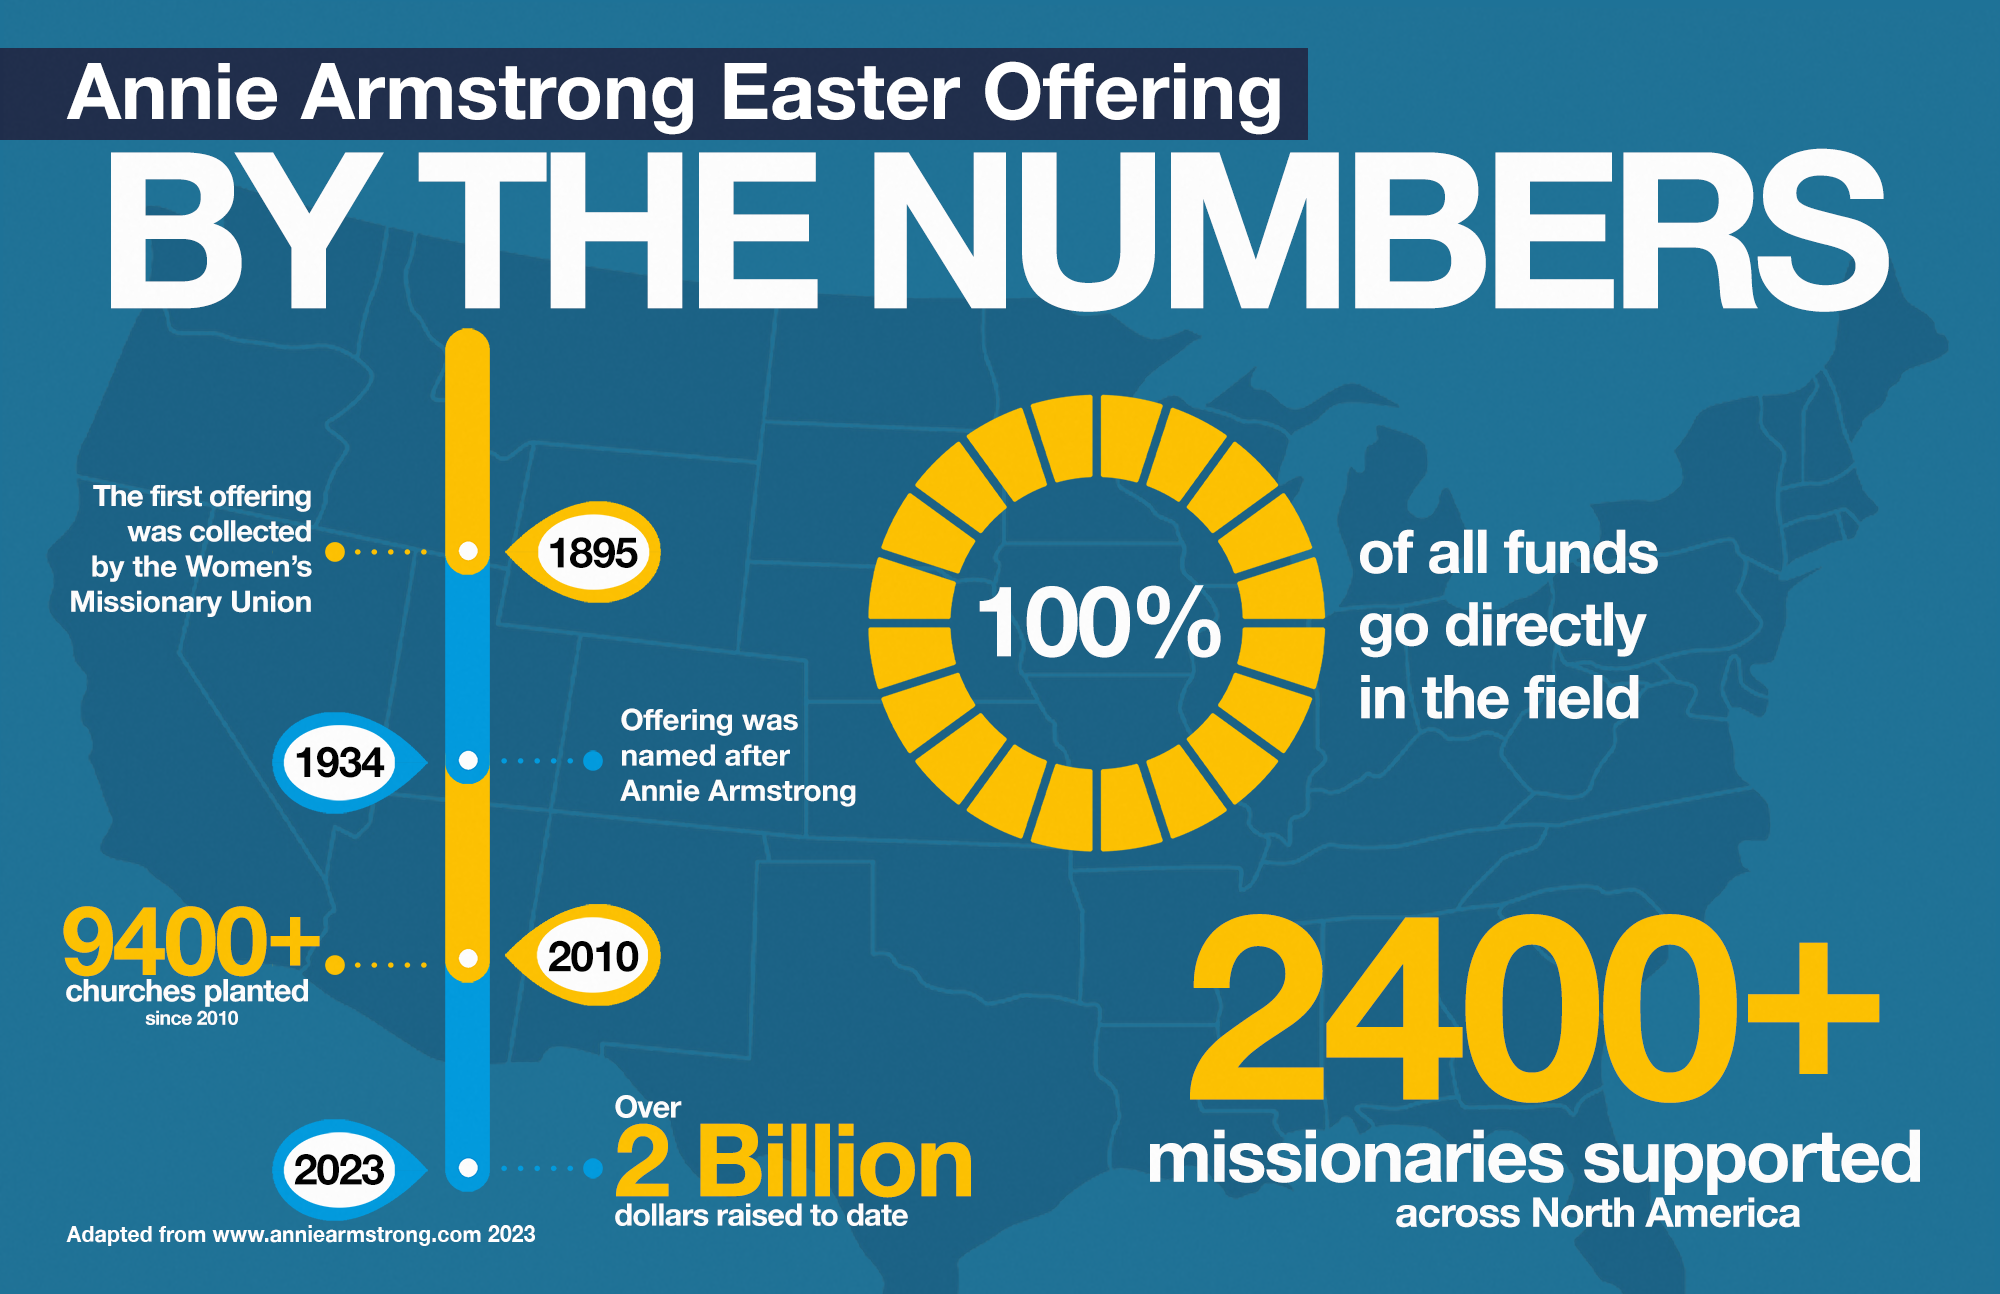 5 Reasons Why We Give to the Annie Armstrong Easter Offering